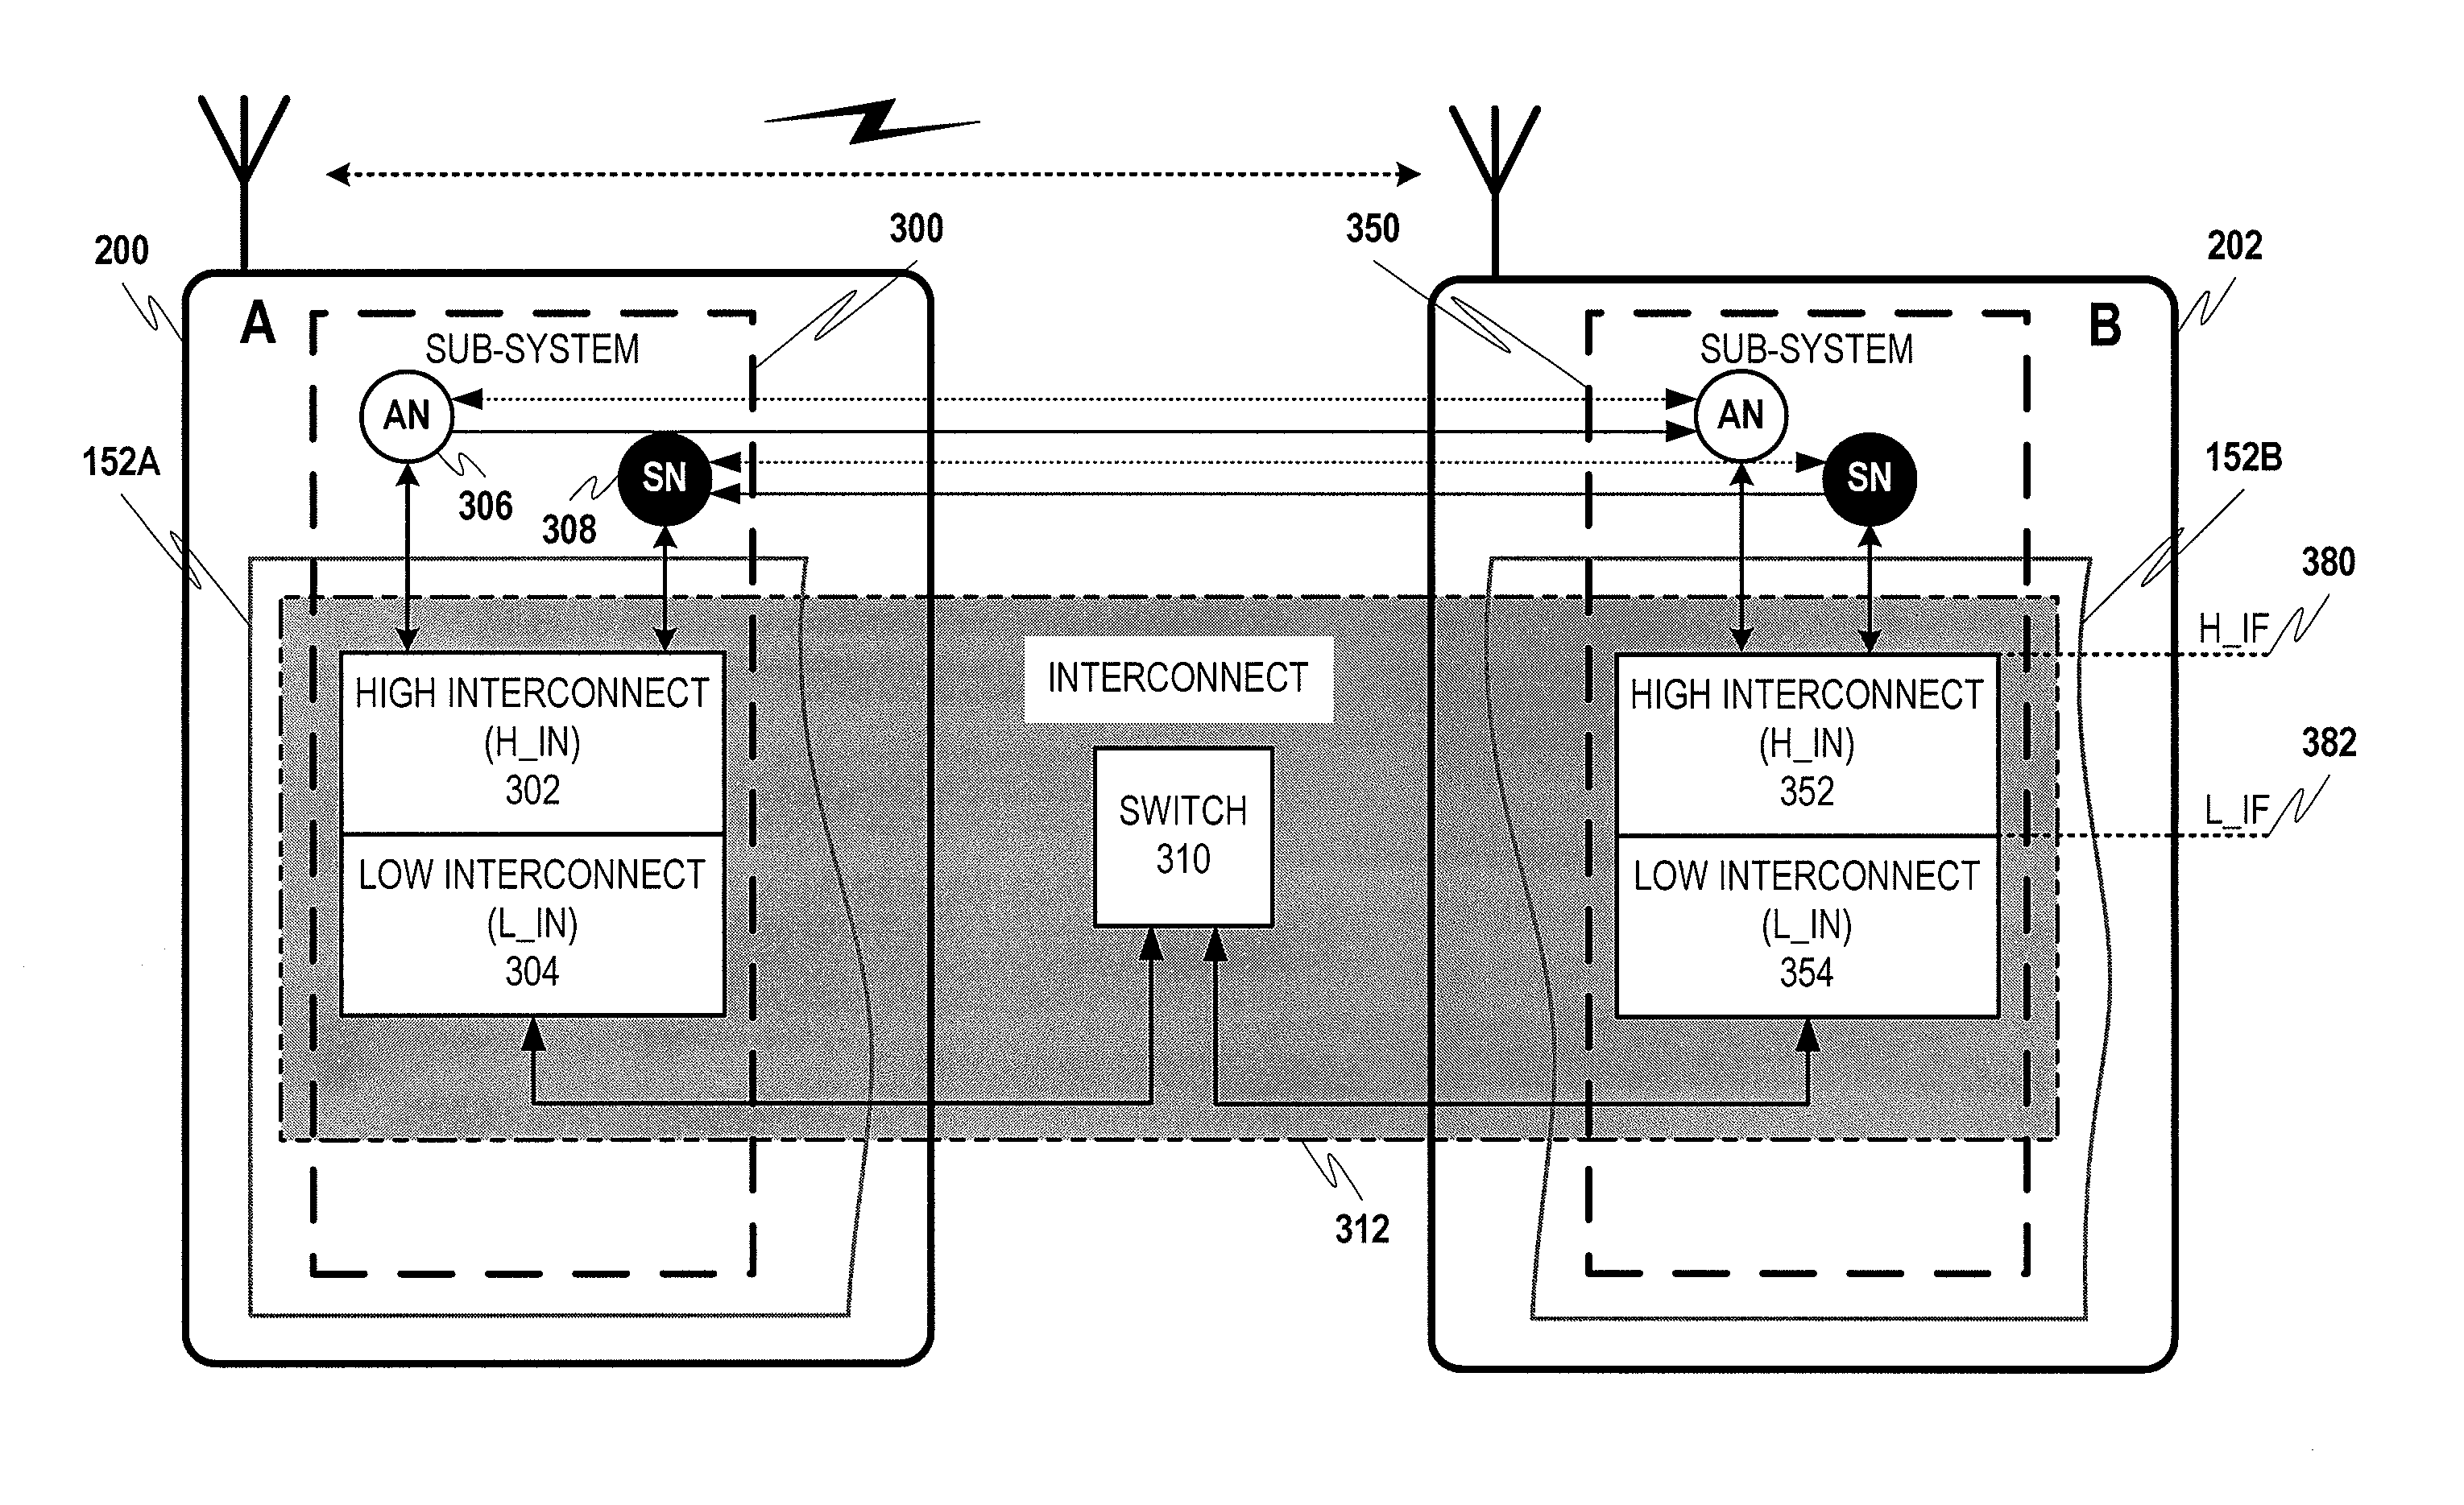 Buffer control for multi-transport architectures